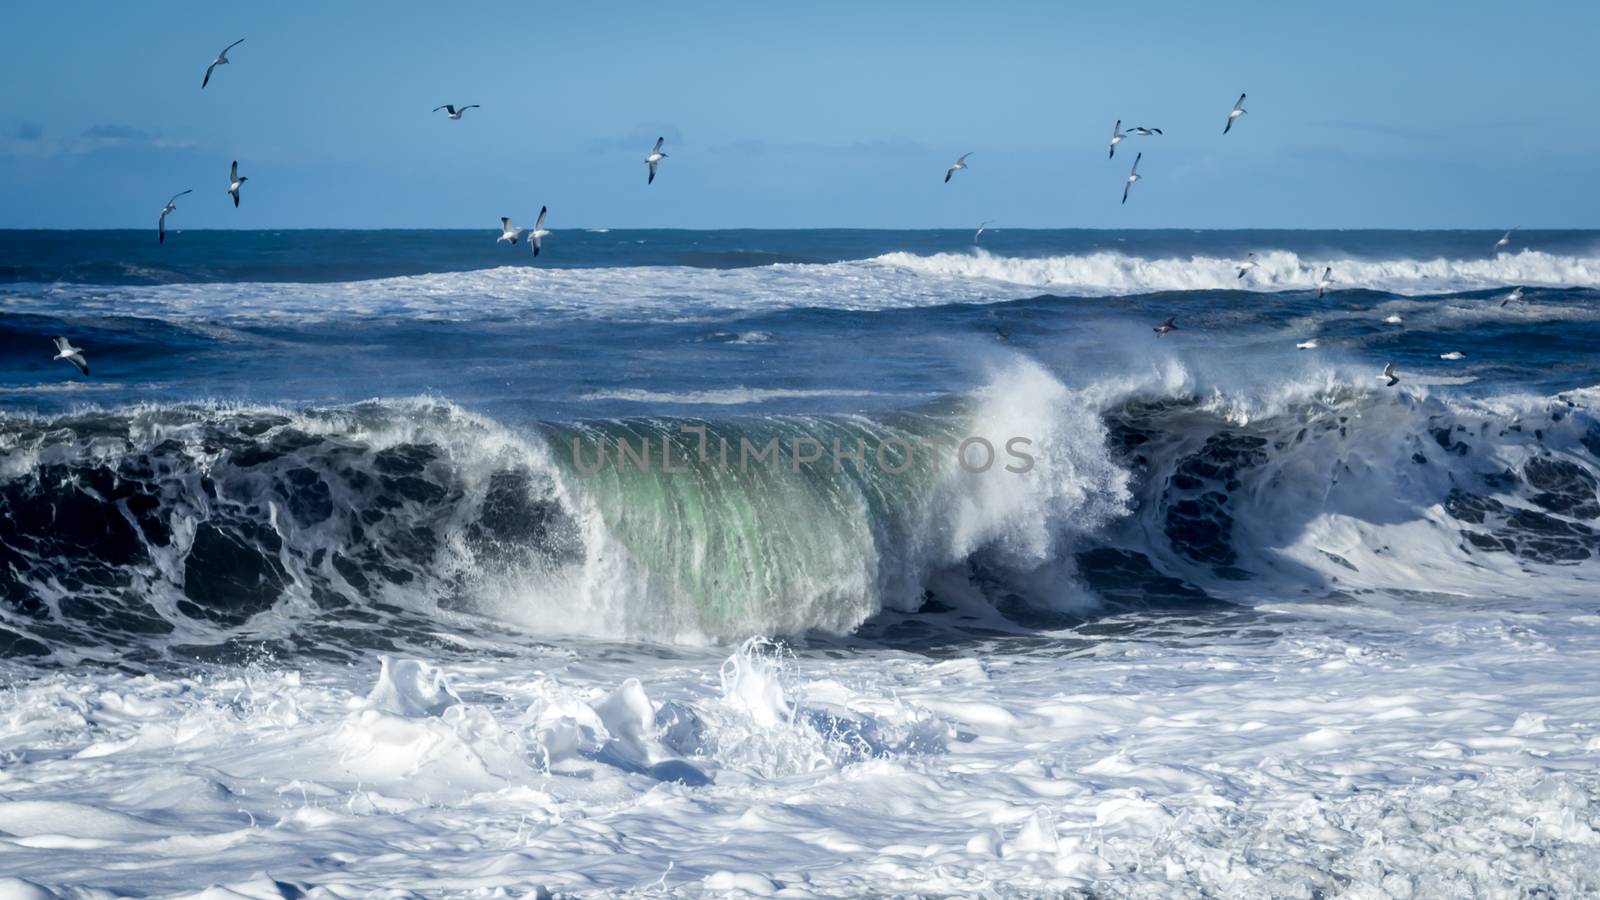 A large wave is crashing on the beach. Color Image. Northern California.